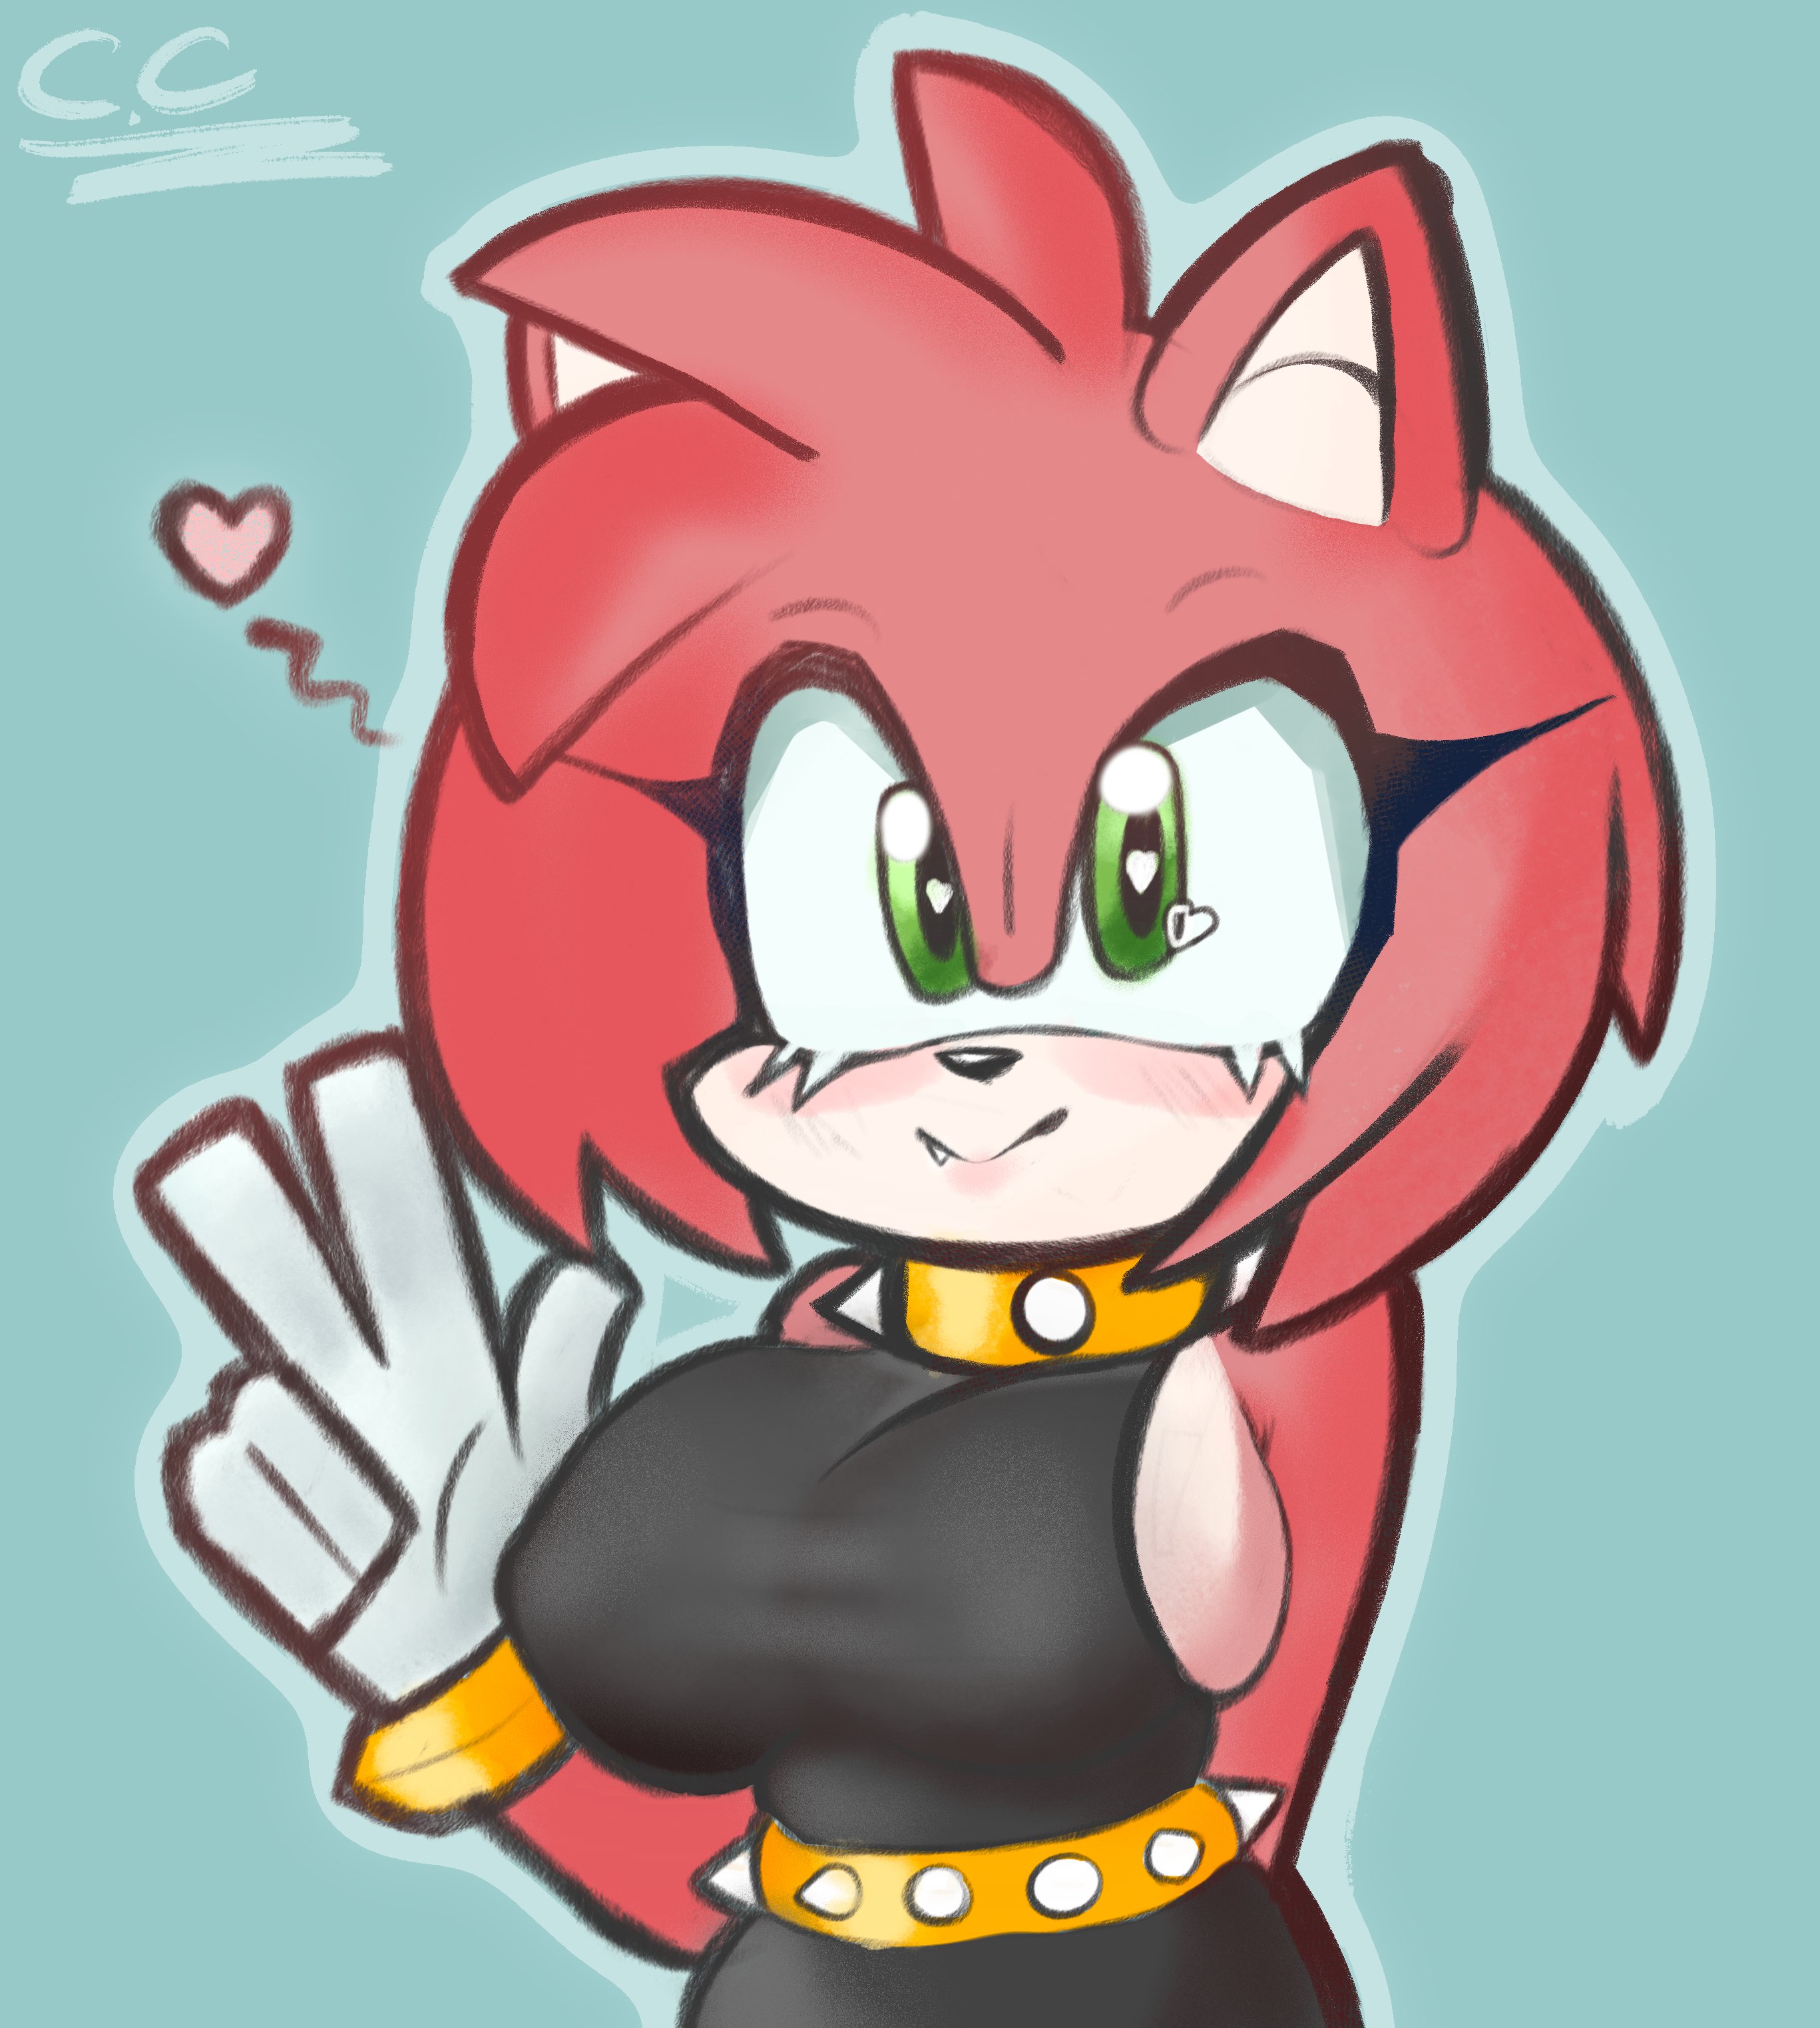 ⊱✿𝒁 𝑯 𝑩✿⊰• on X: How old do you think Amy is in the game